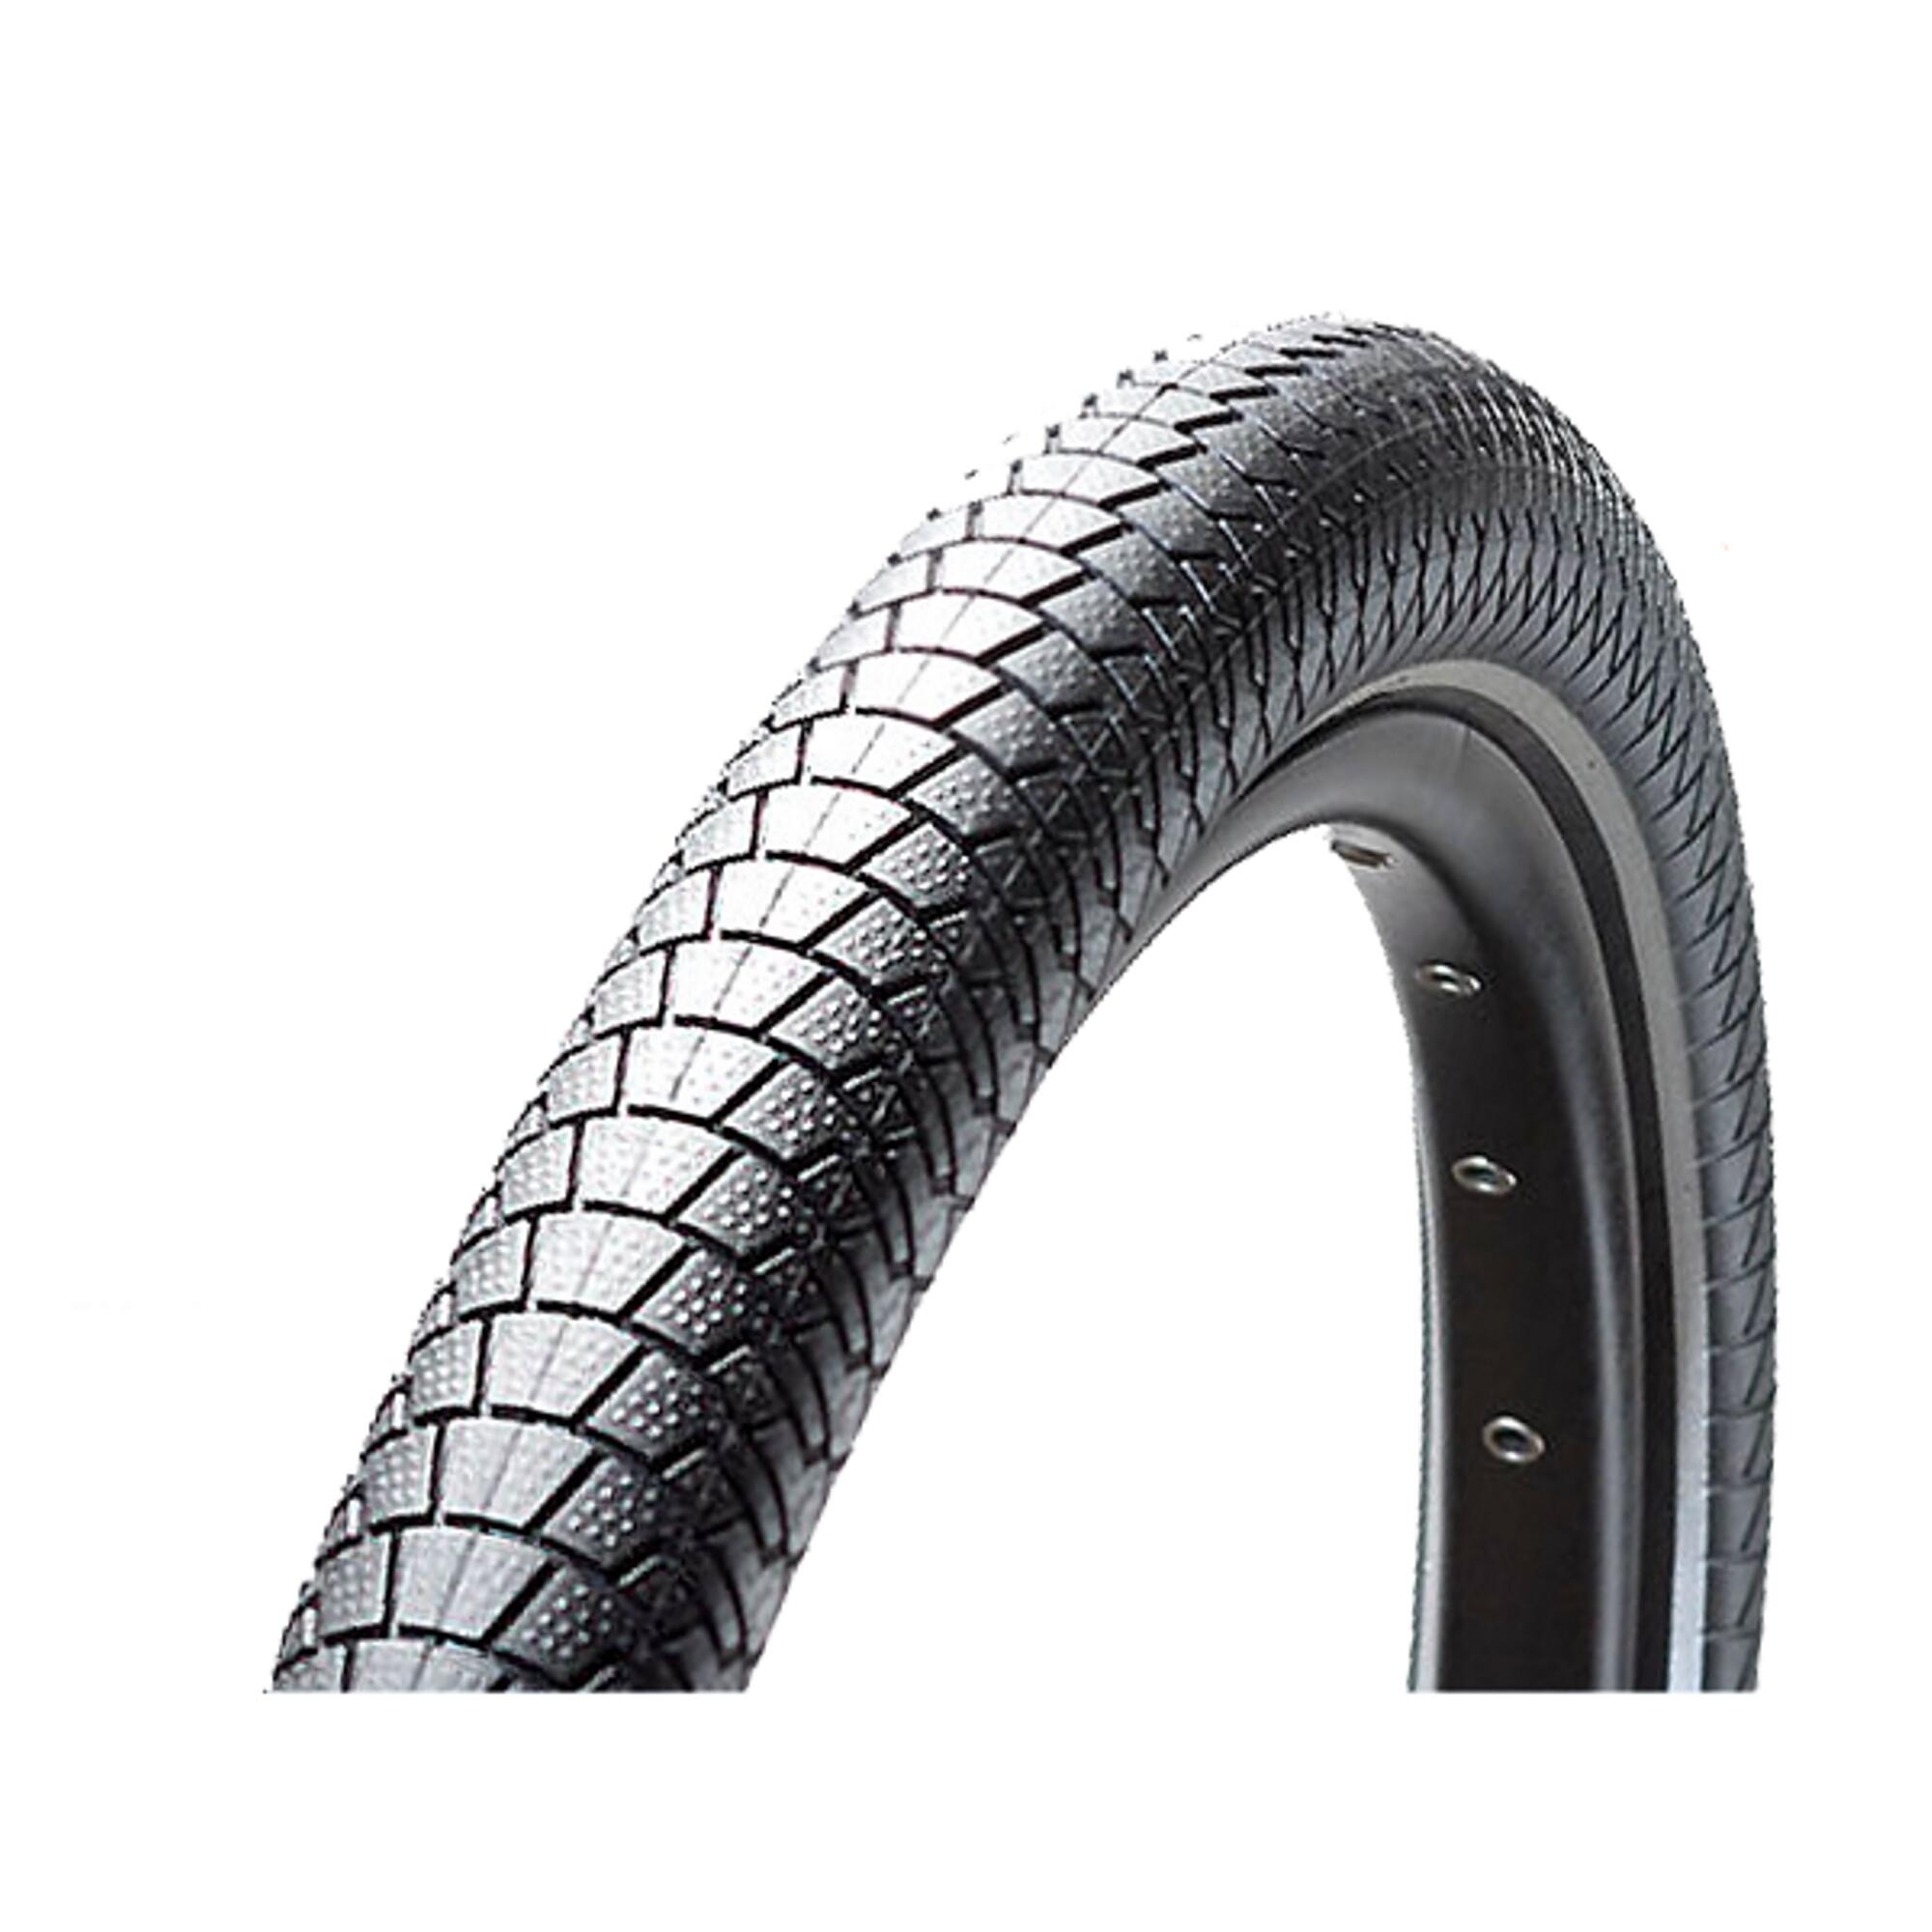 Tyre Cargo C1996 CST Brooklyn Pro 26"*2.15 55-559 For Longtail R500 Cargo Bike 2/2